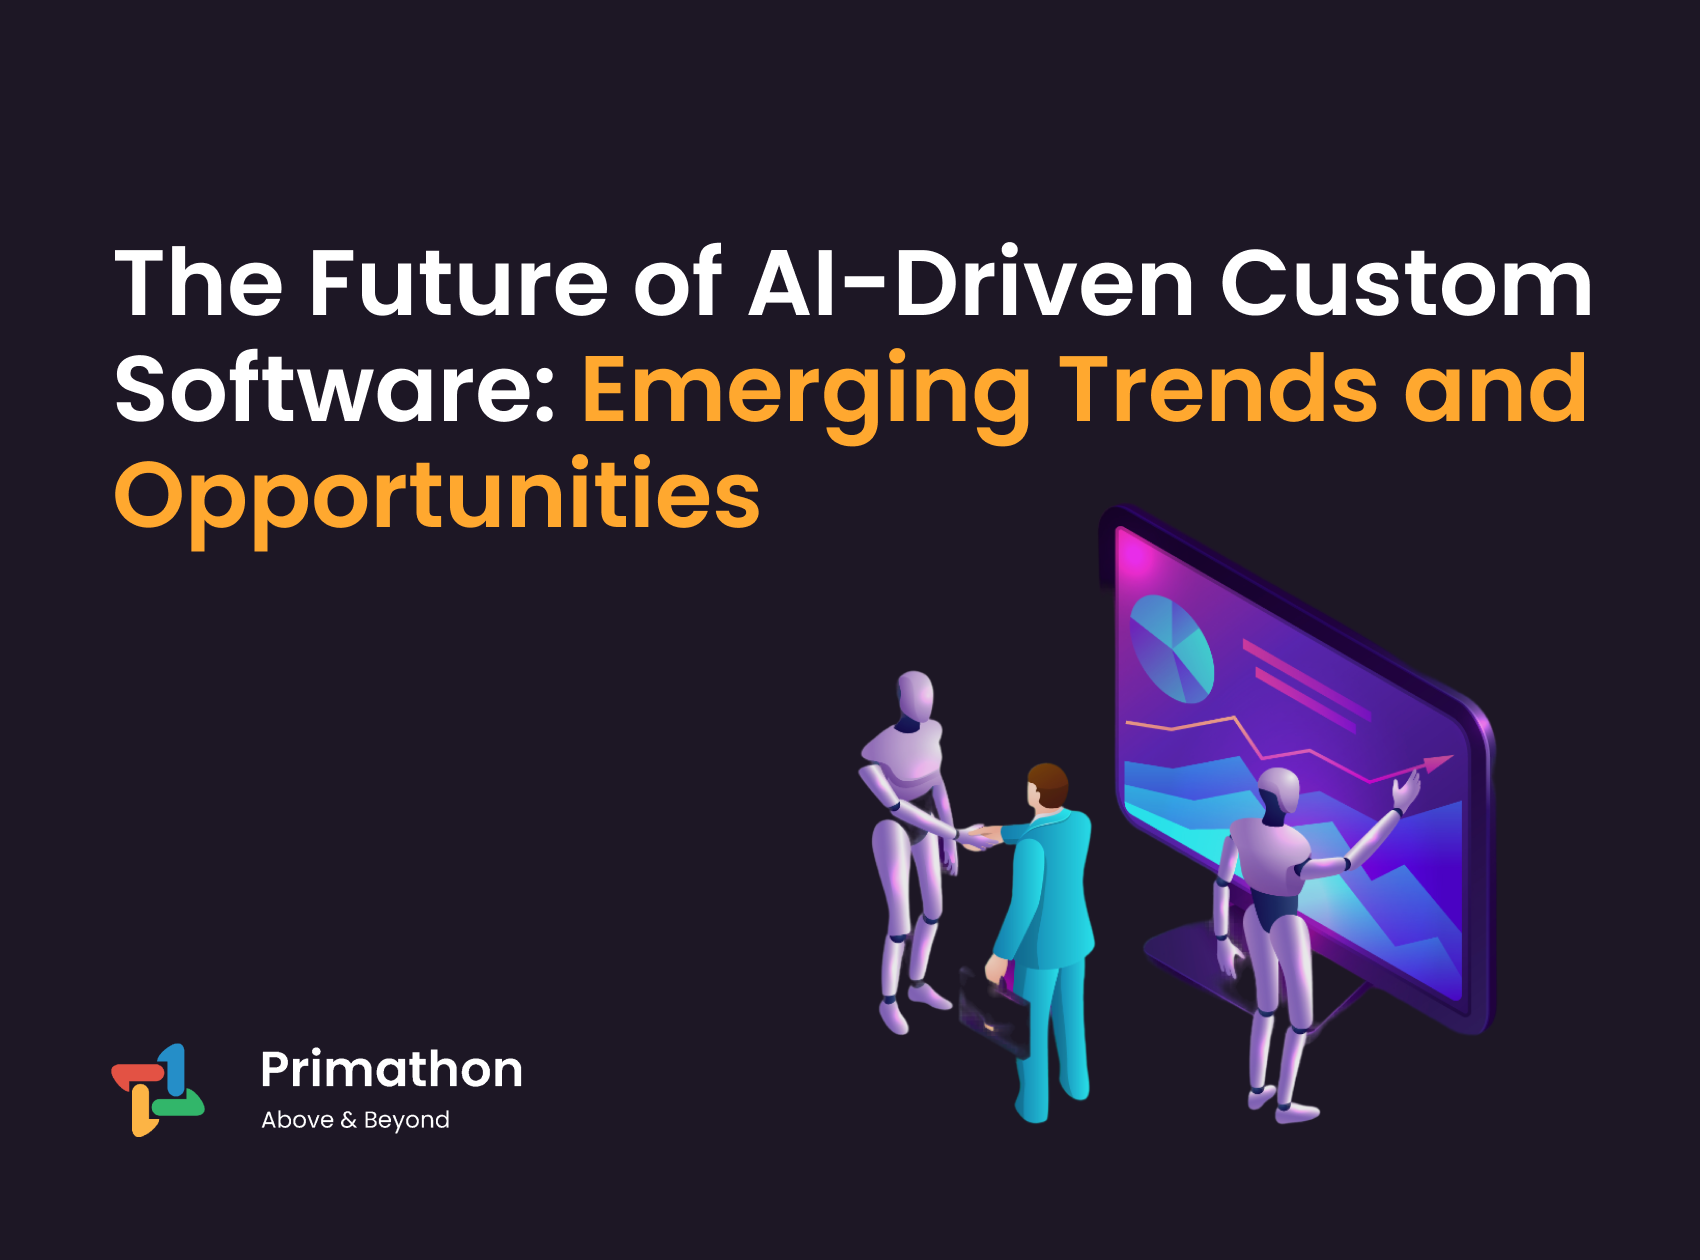 The Future of AI-Driven Custom Software: Emerging Trends and Opportunities